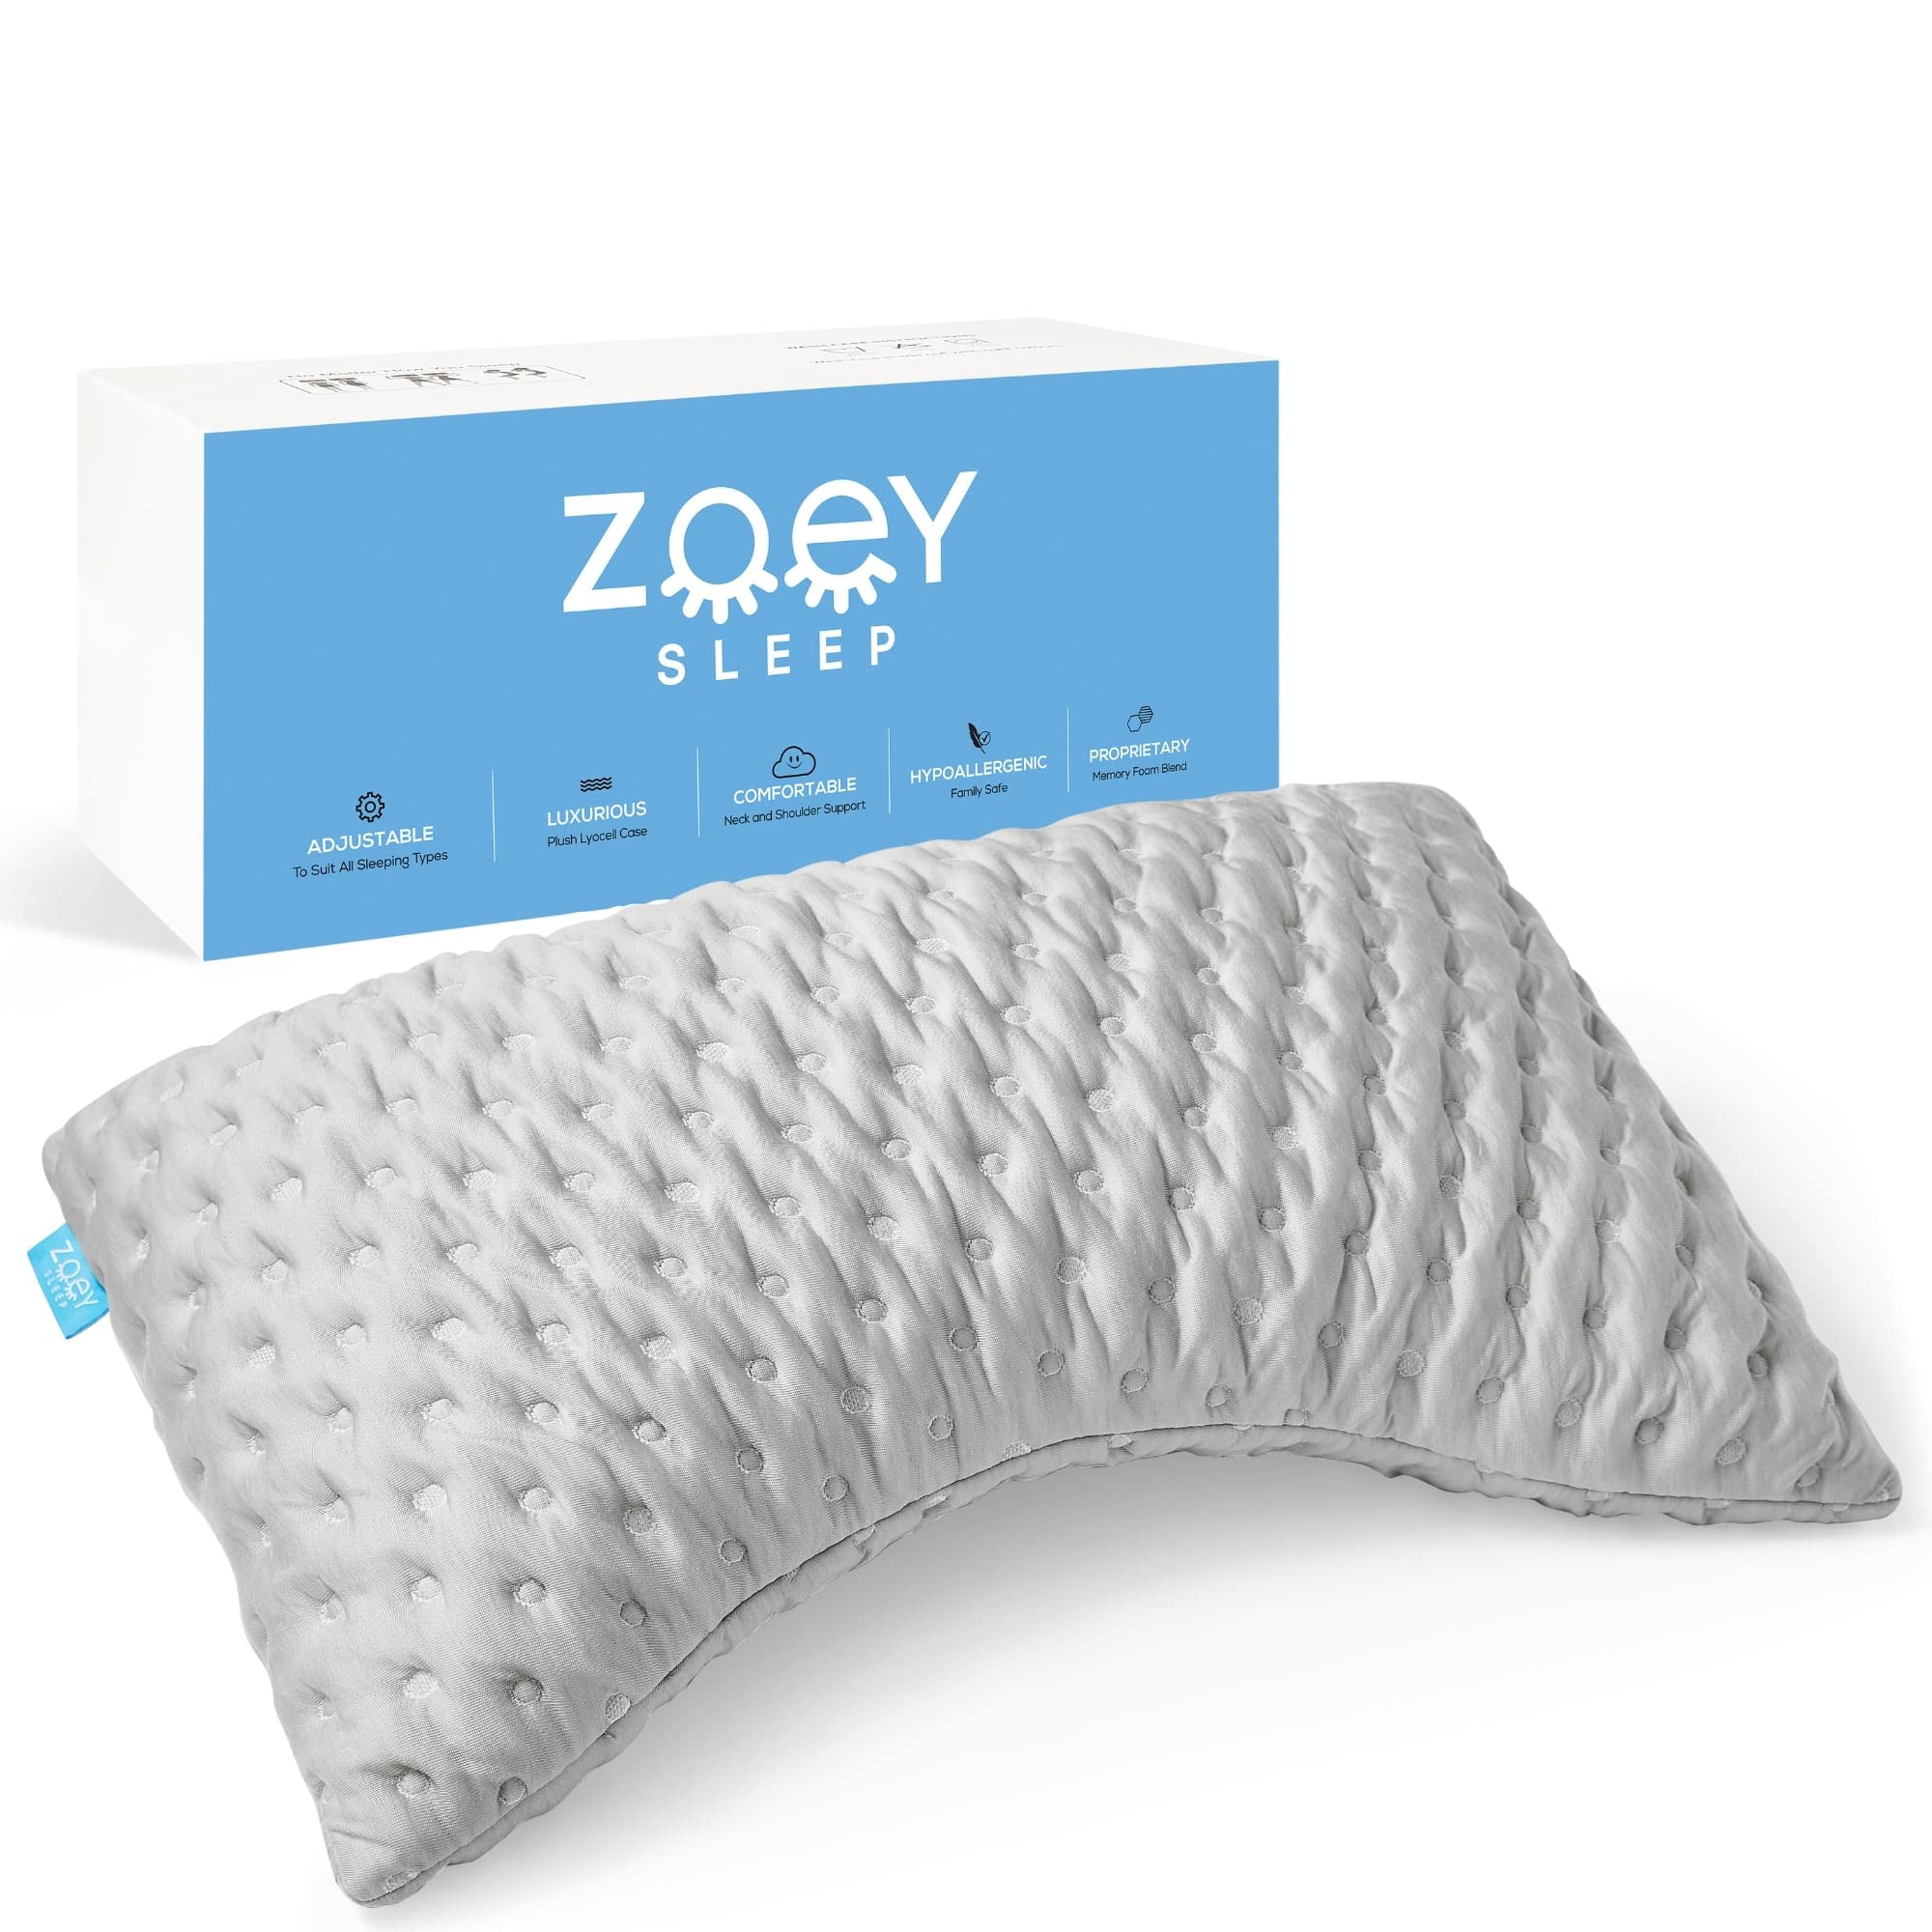 Zoey Sleep Side Sleep Pillow - Memory Foam Bed Pillows for Sleeping - 100% Adjustable Supportive Loft - Helps Relieve Neck and Shoulder Pain